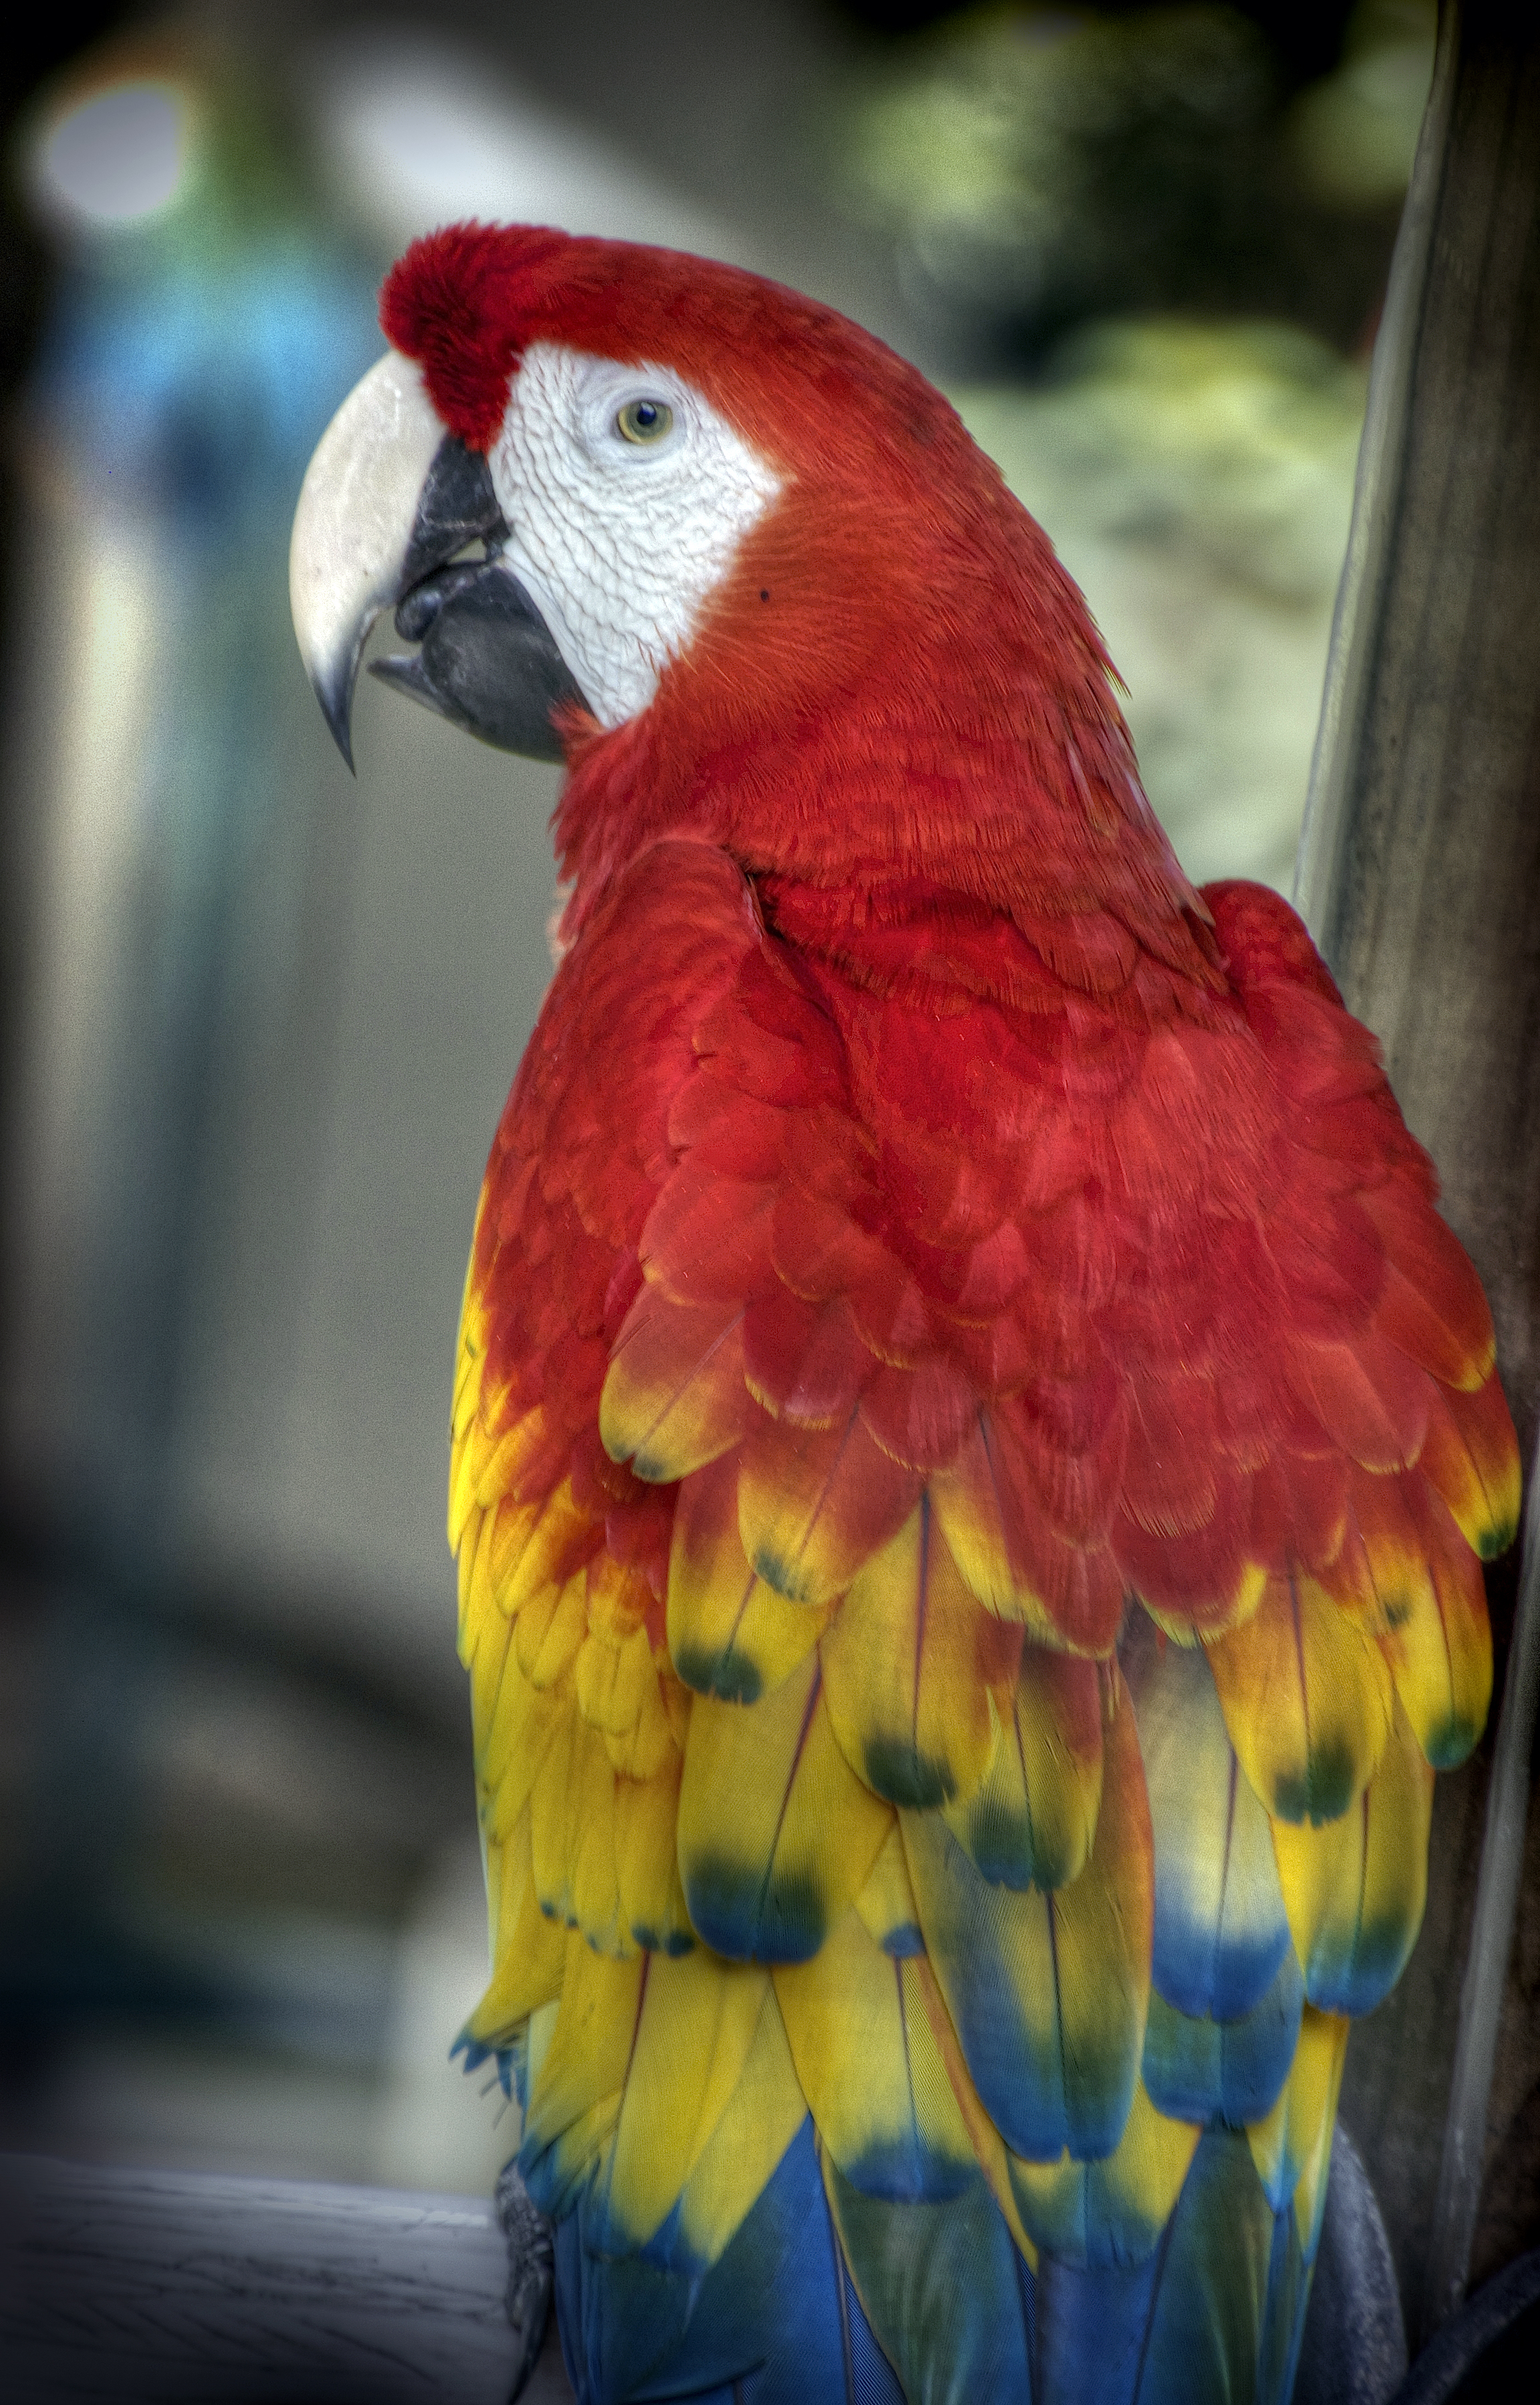 File:Red parrot profile (7767867302).jpg - Wikimedia Commons